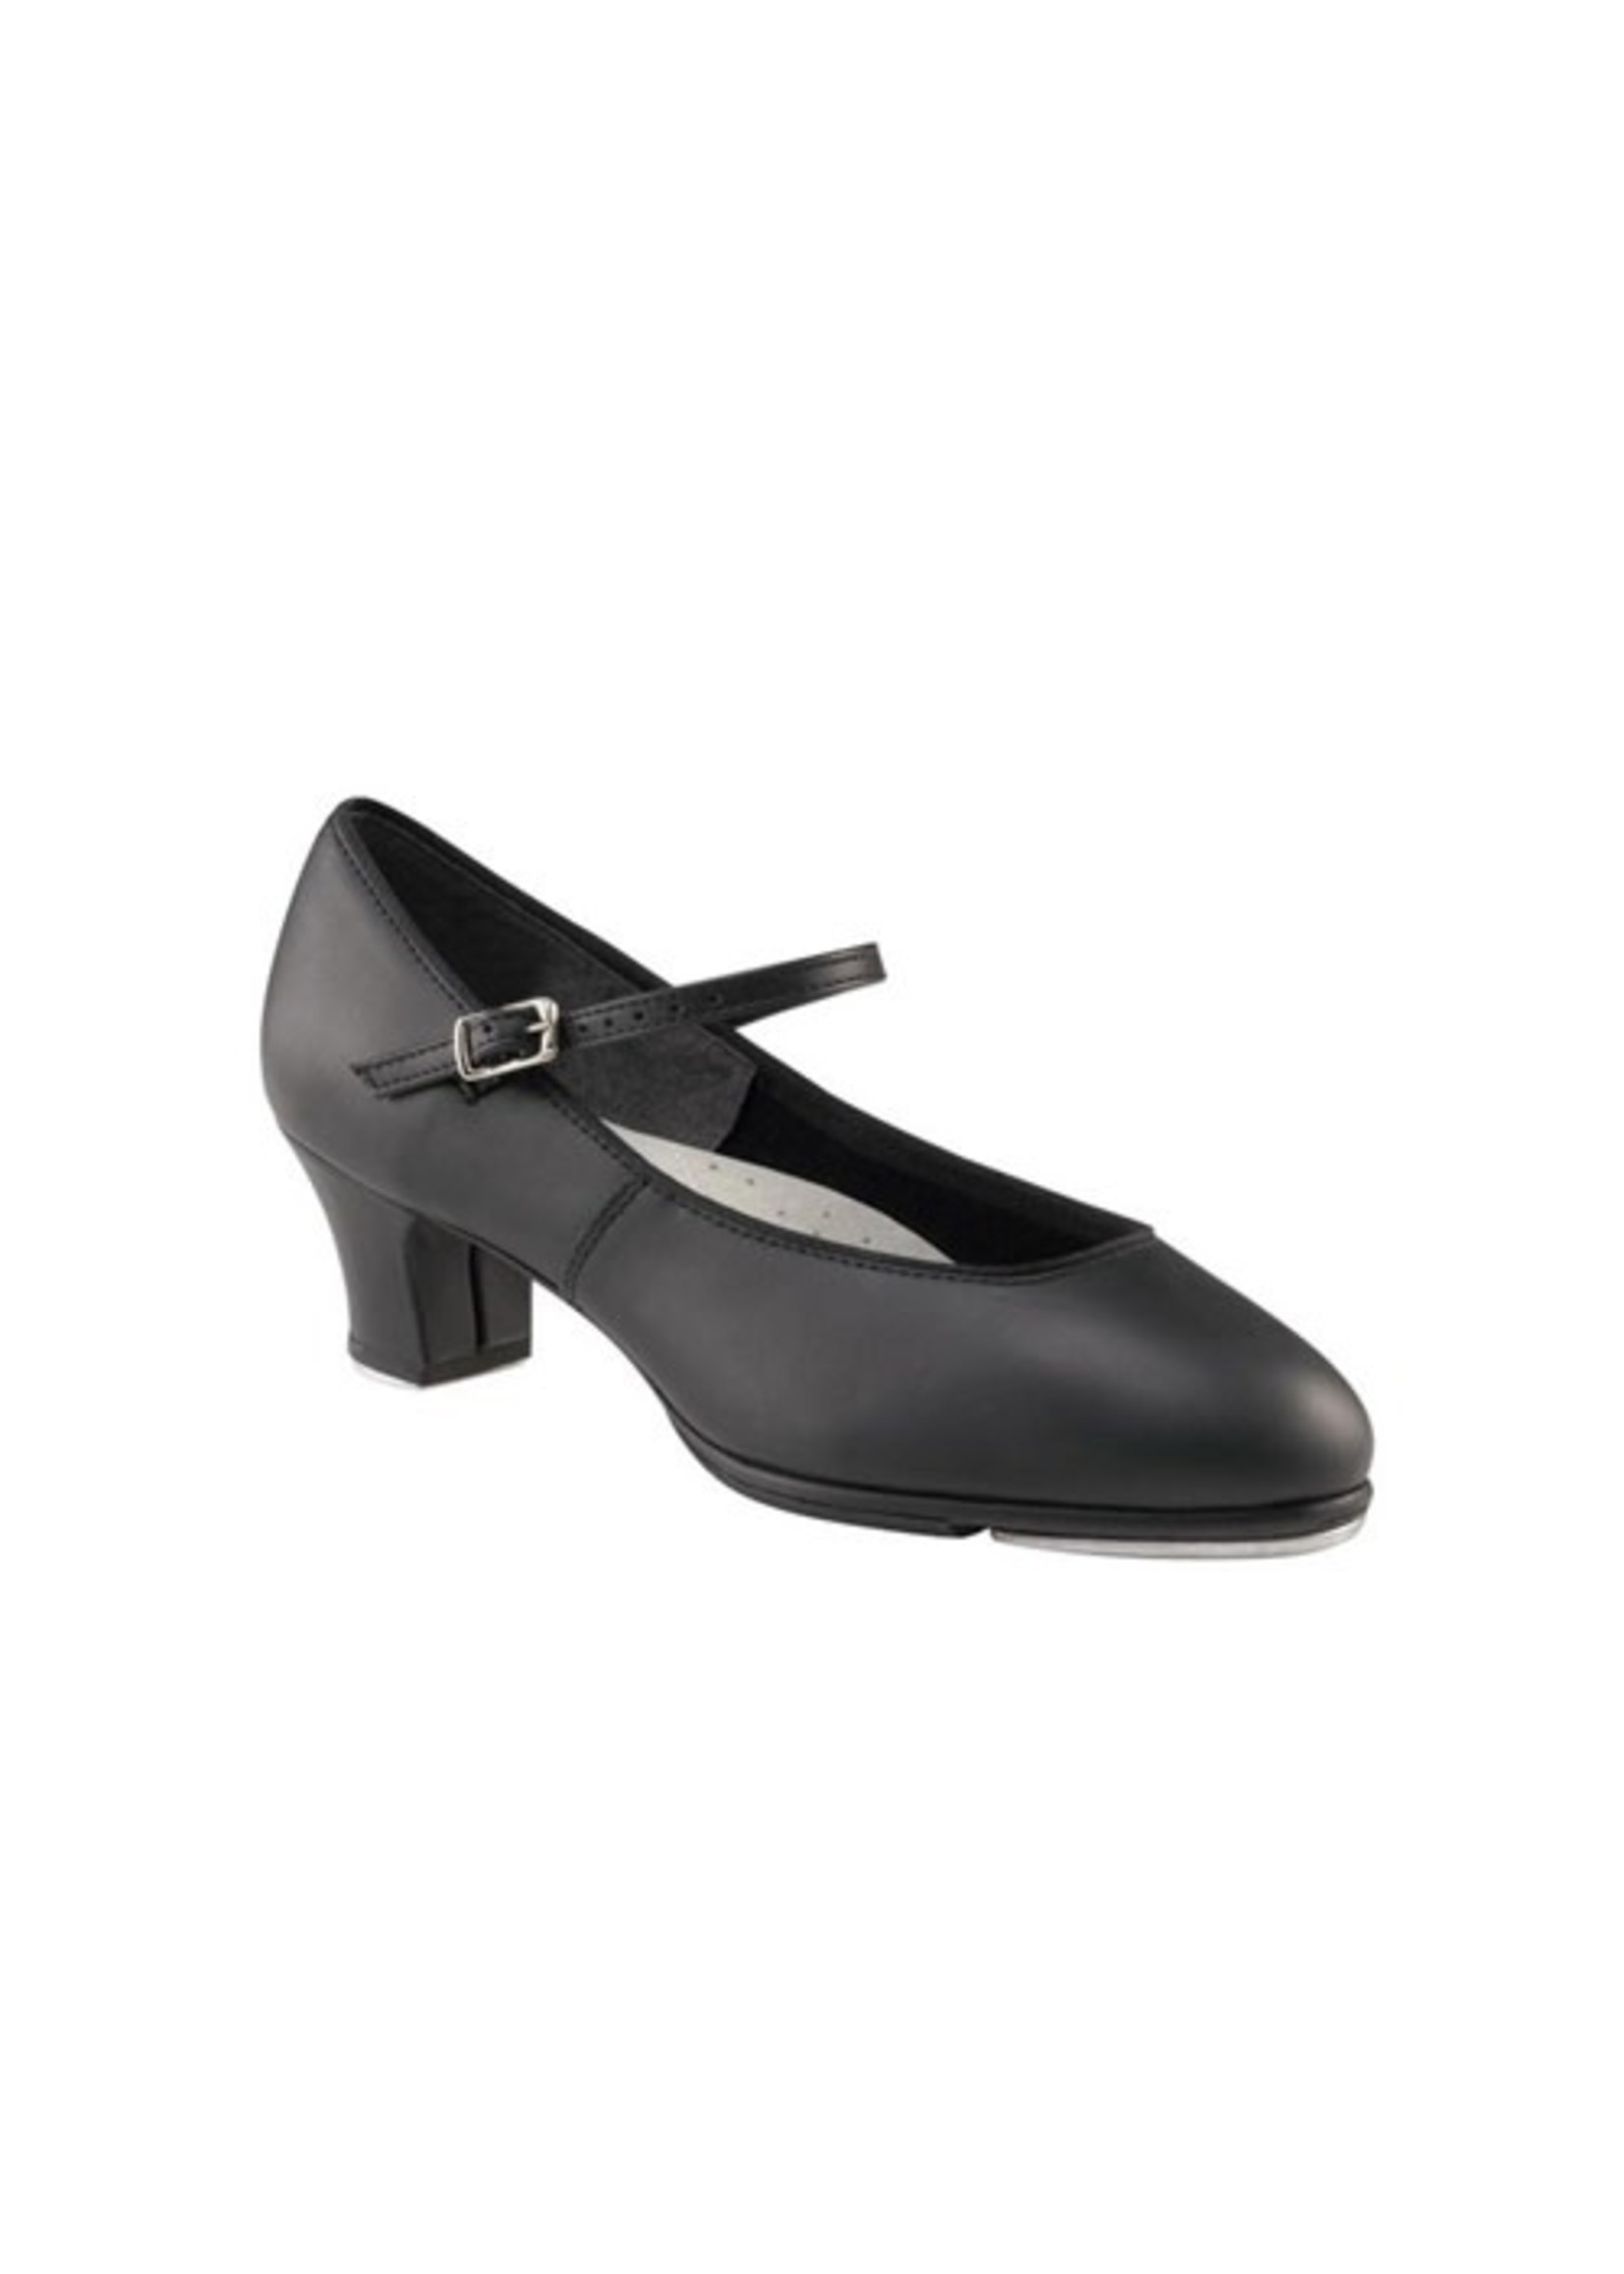 Capezio 1.5" Heeled Leather Character Tap Shoe